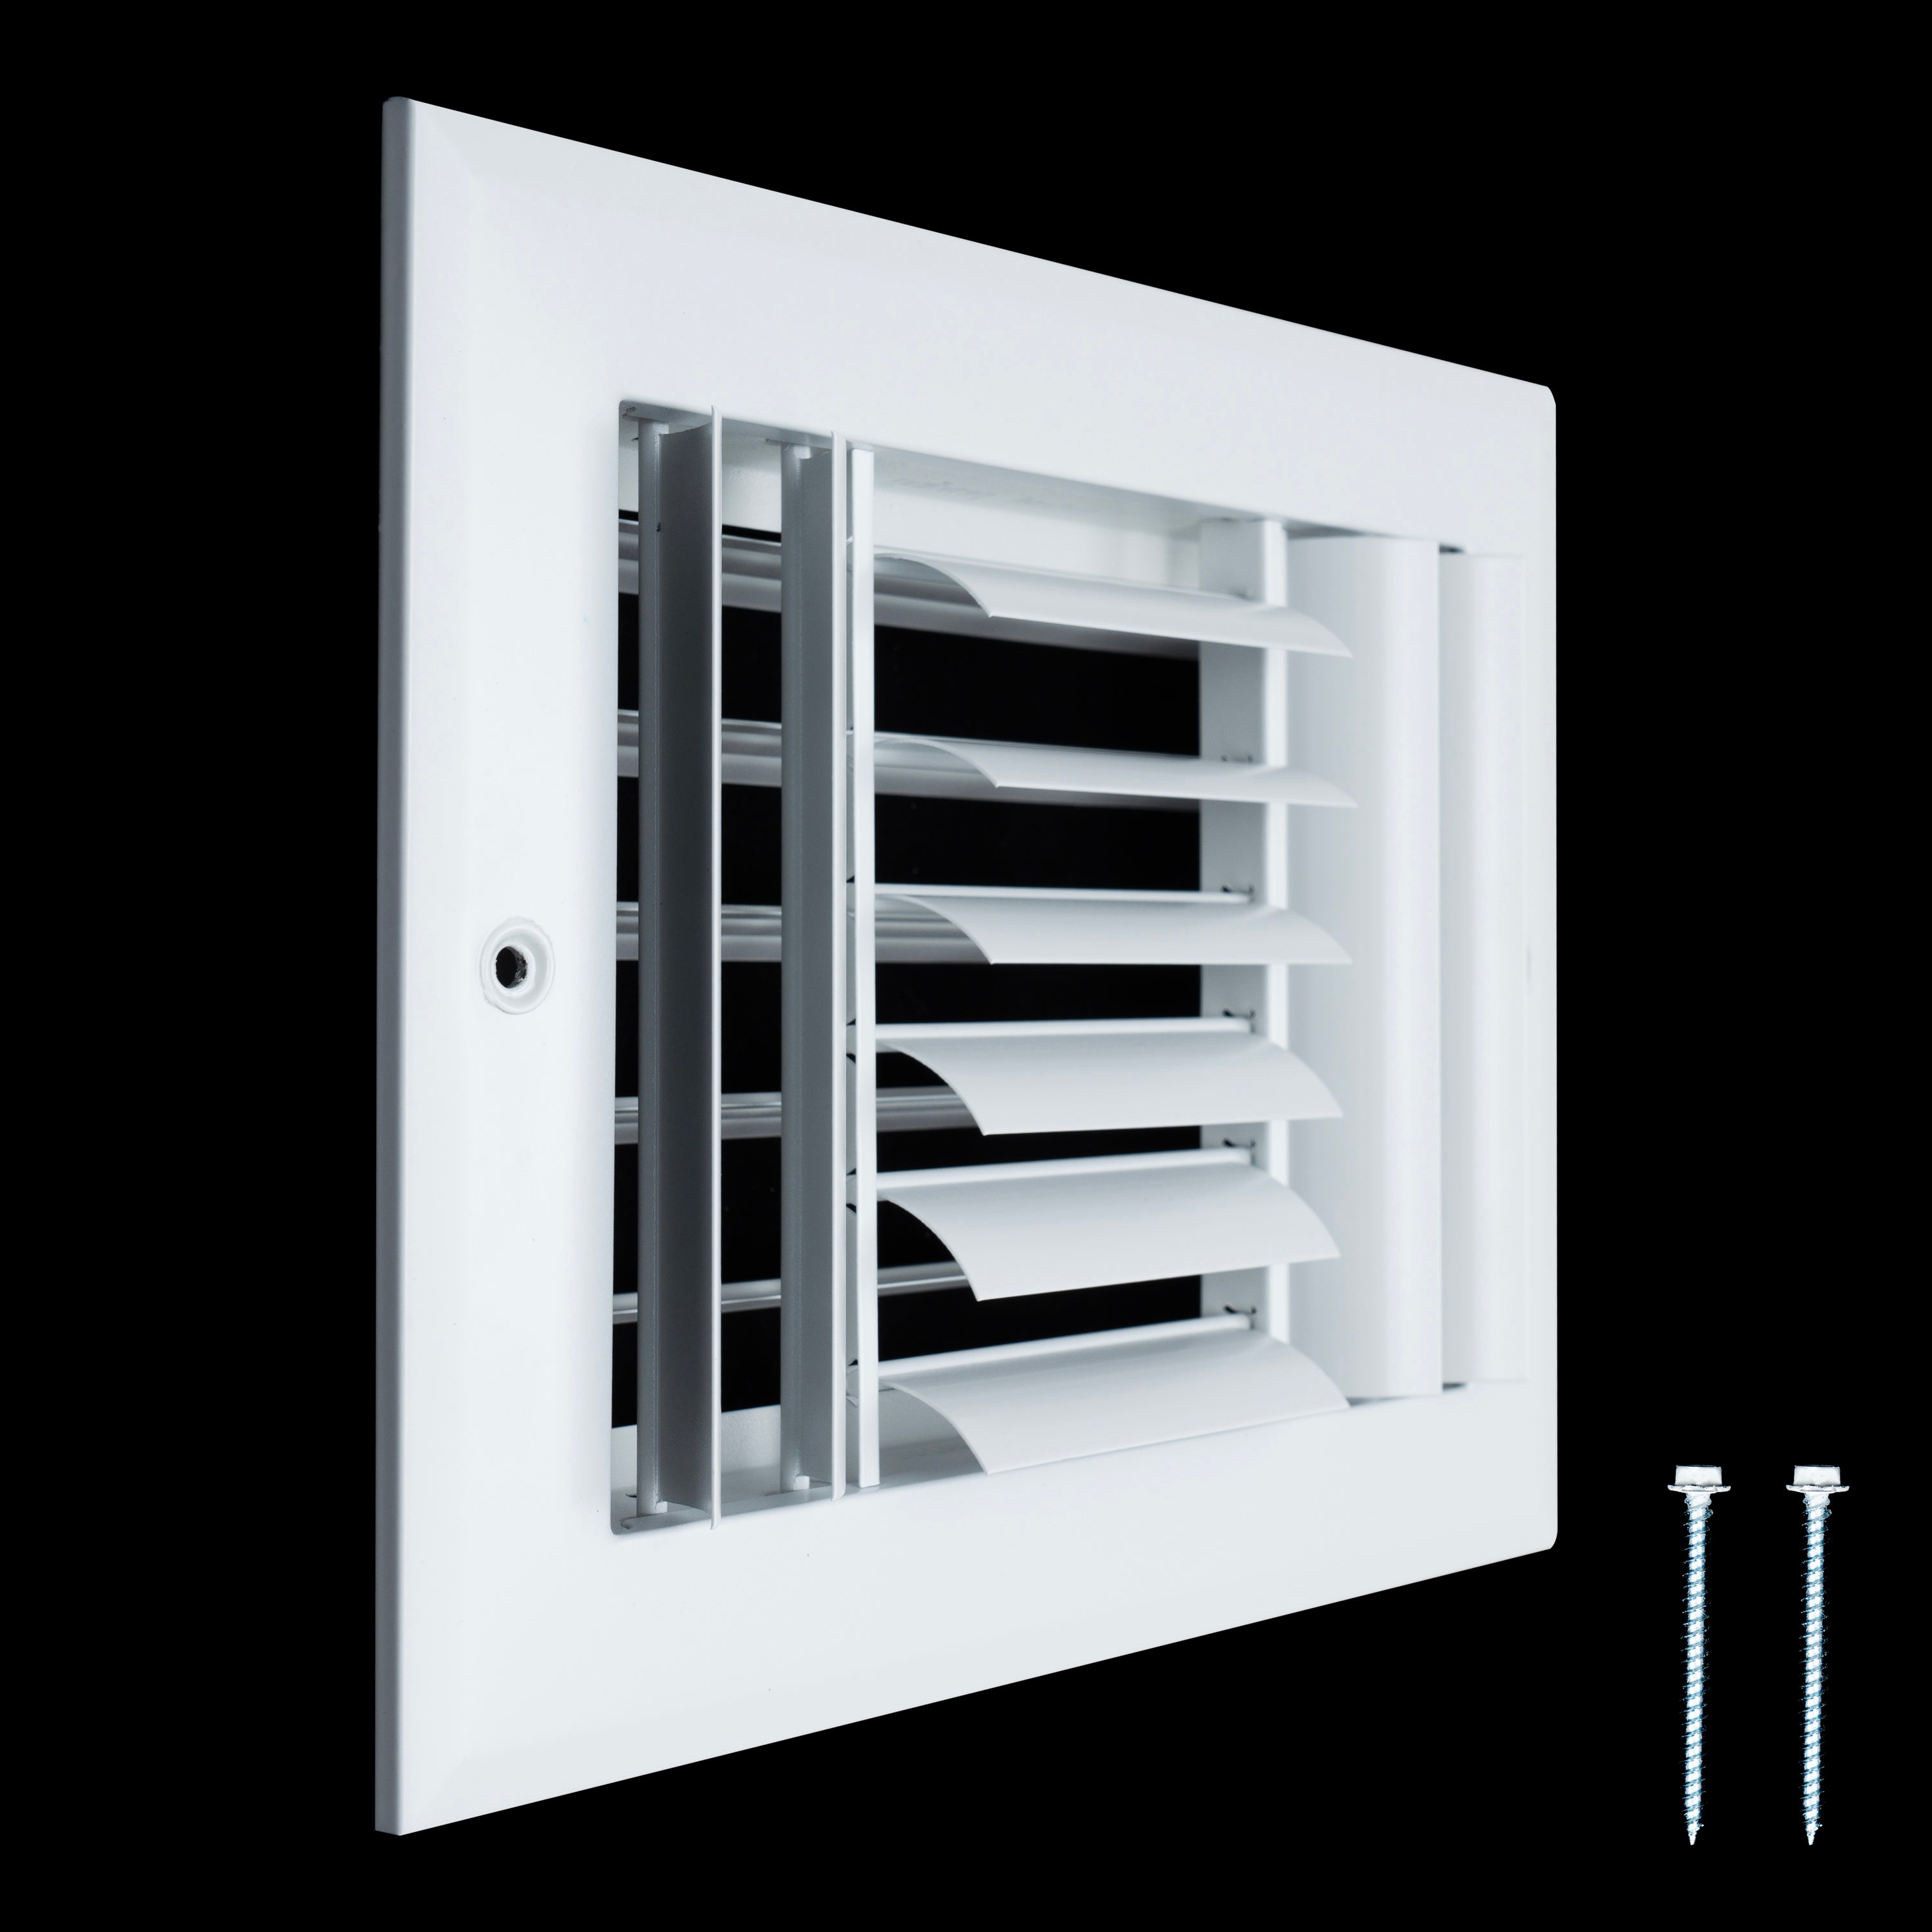 8"W x 6"H [Duct Opening] Aluminum 3-WAY Adjustable Air Supply Grille | Register Vent Cover Grill for Sidewall and Ceiling | White | Outer Dimensions: 9.75"W x 7.75"